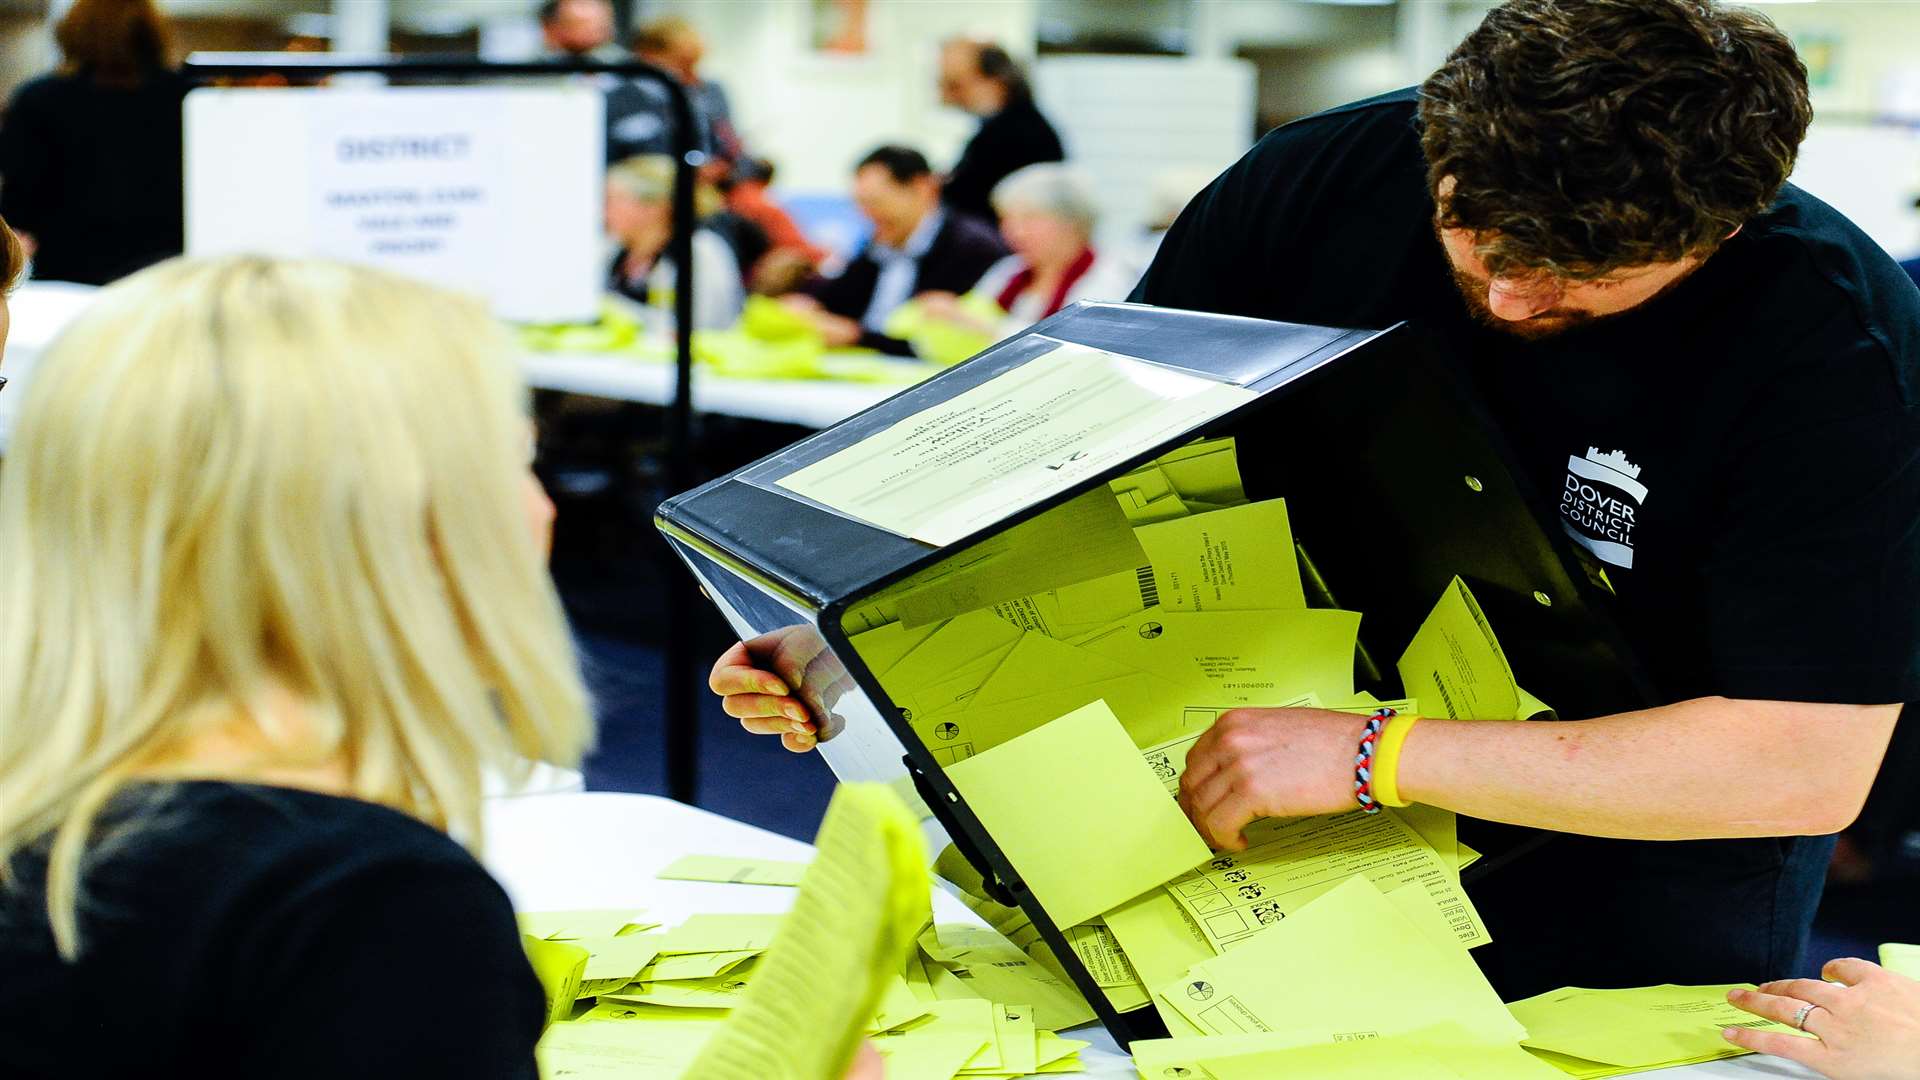 The first ballot box being emptied. Stock image